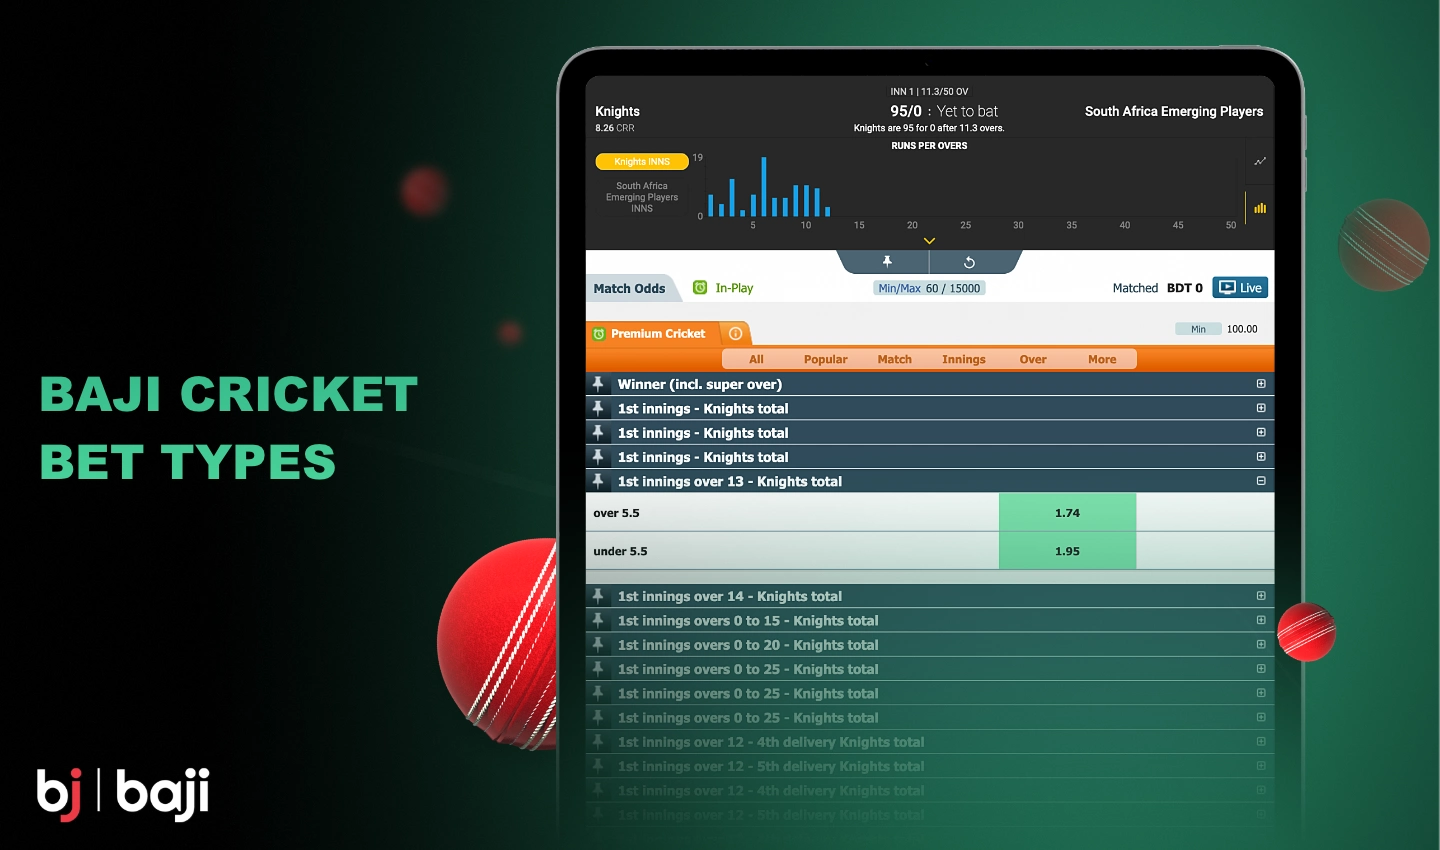 There are various types of cricket betting available on the Baji platform